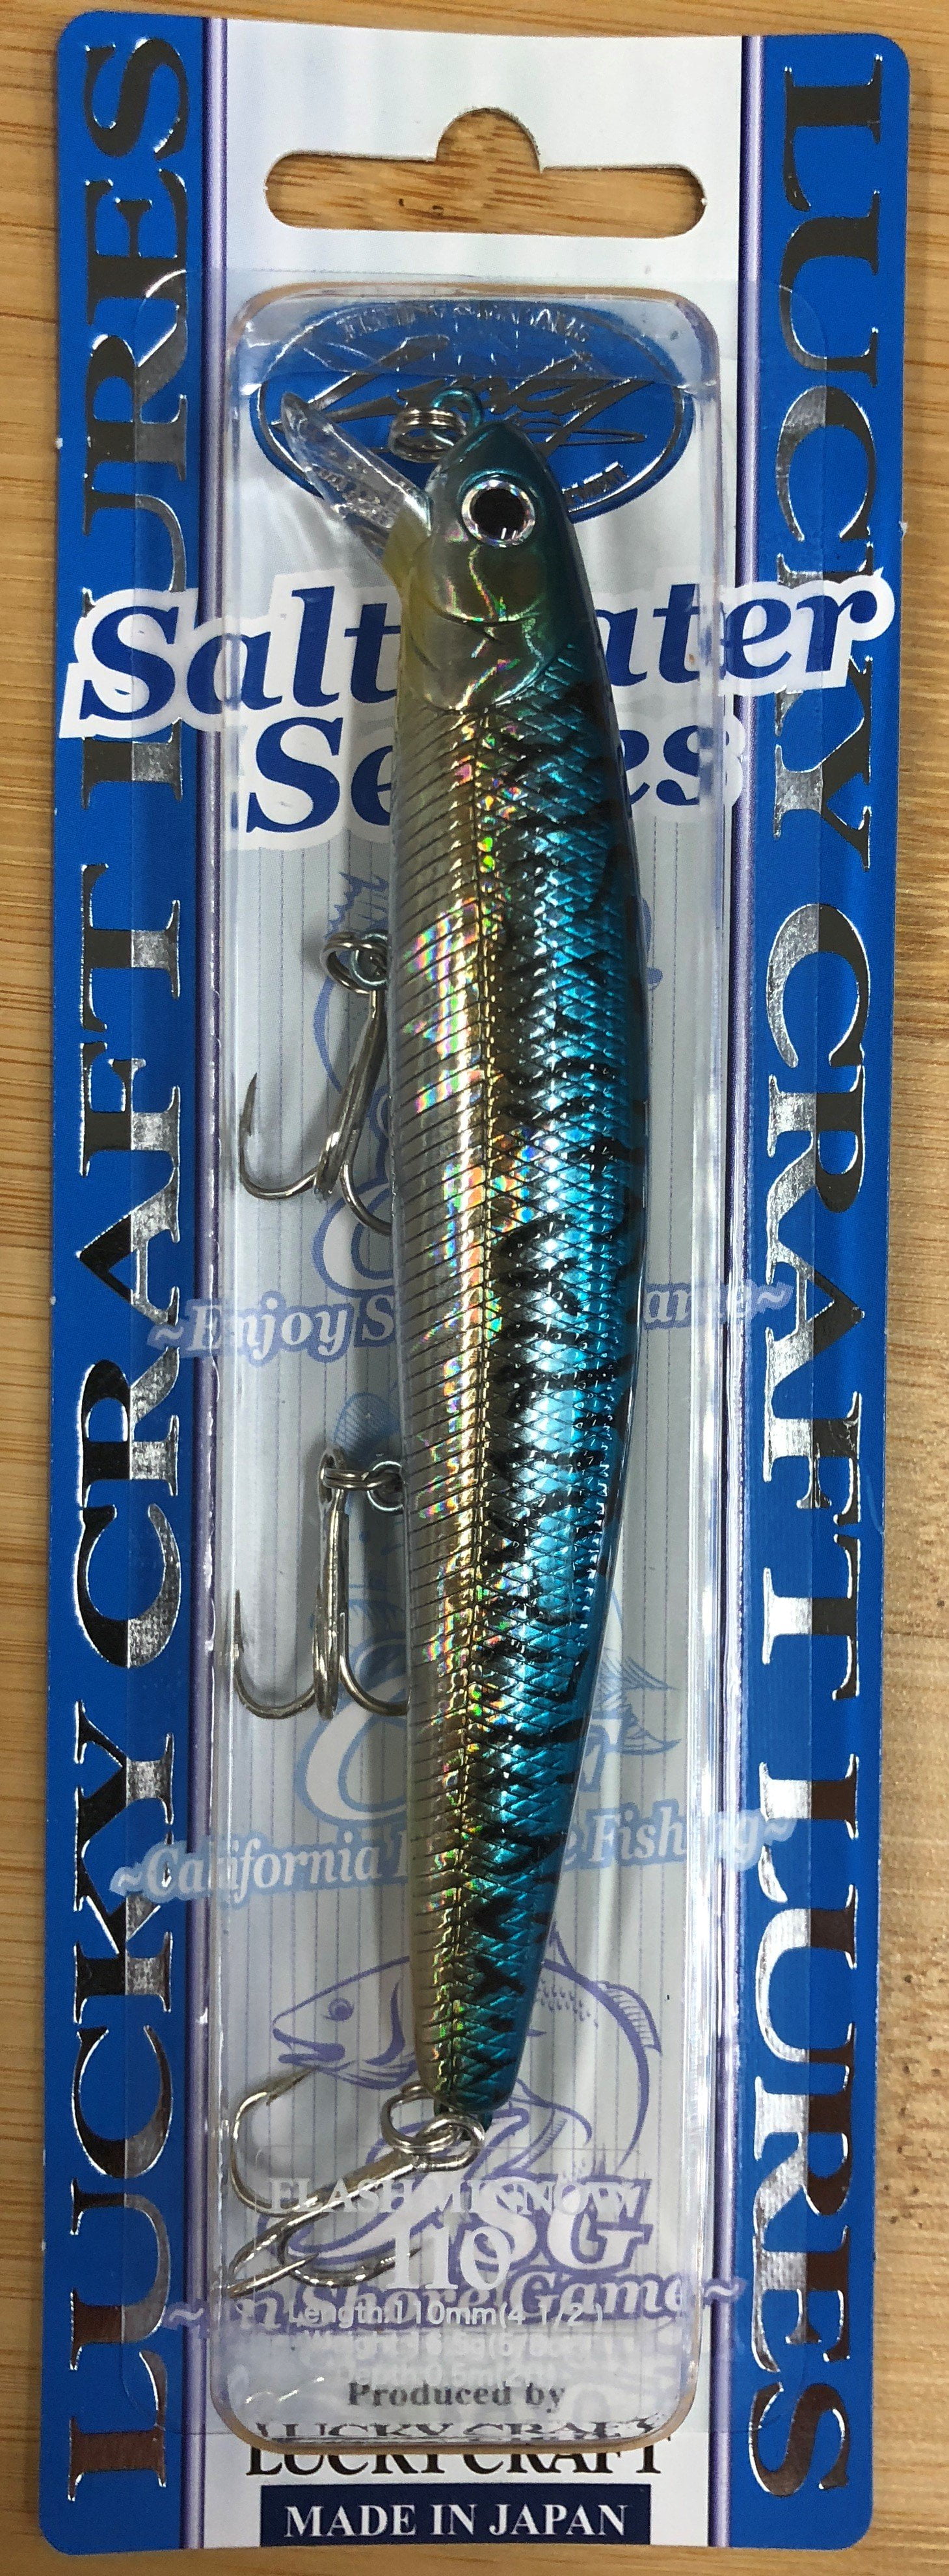 Lucky Craft Flash Minnow110 SuperGlow MS CherryDineSardine 750 New In Package 